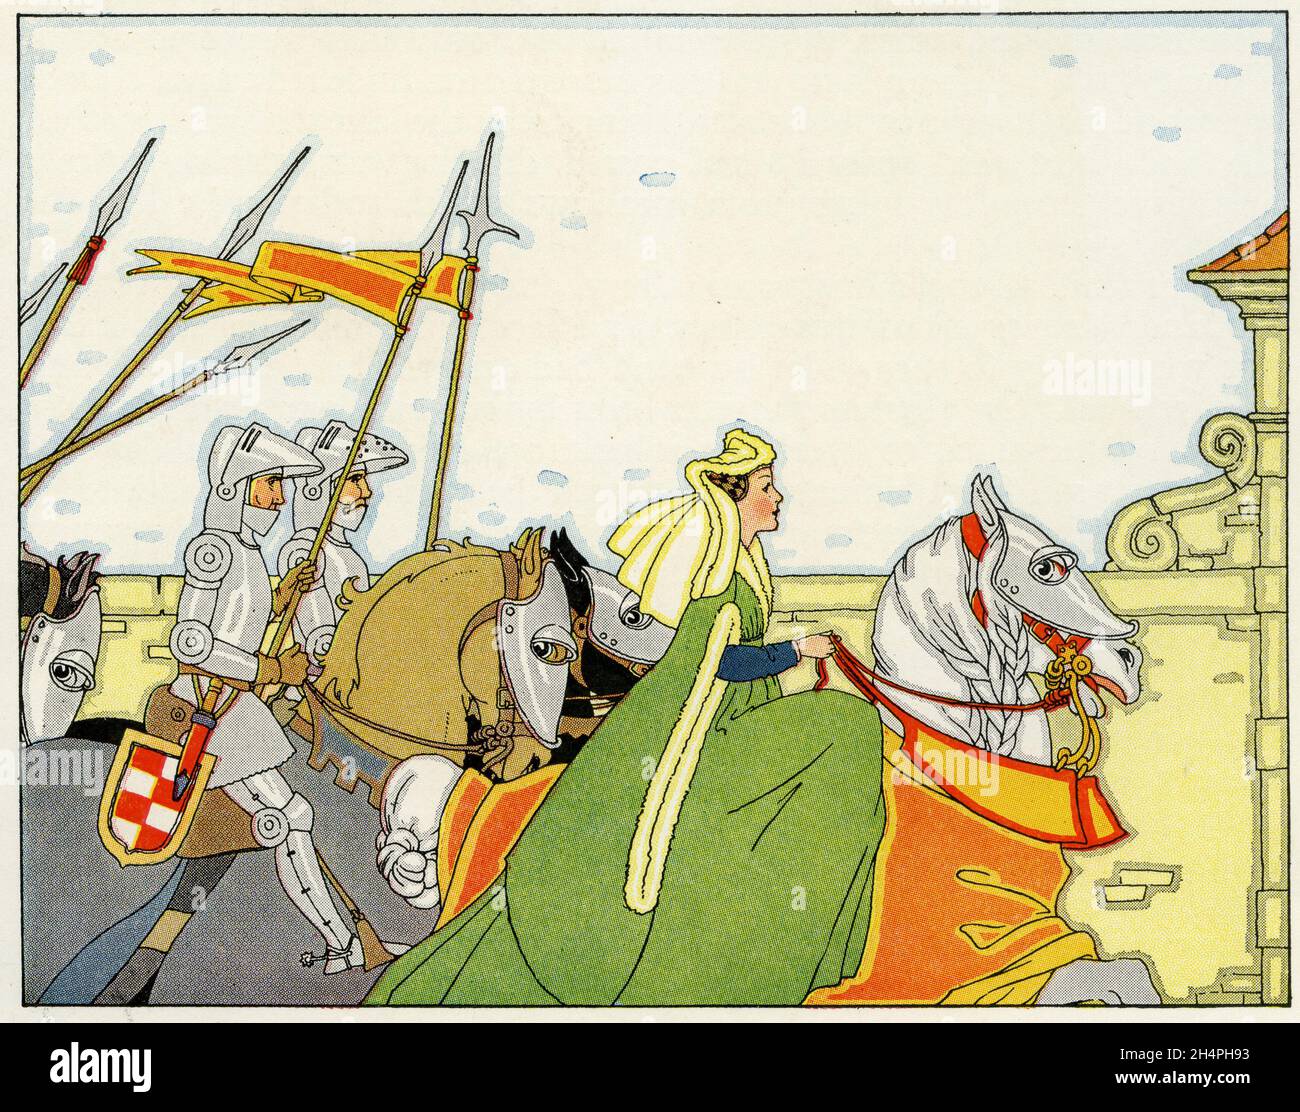 Quaint illustration of tradiitonal life in Holland, with the queen accompanied by her knights; published circa 1928 Stock Photo